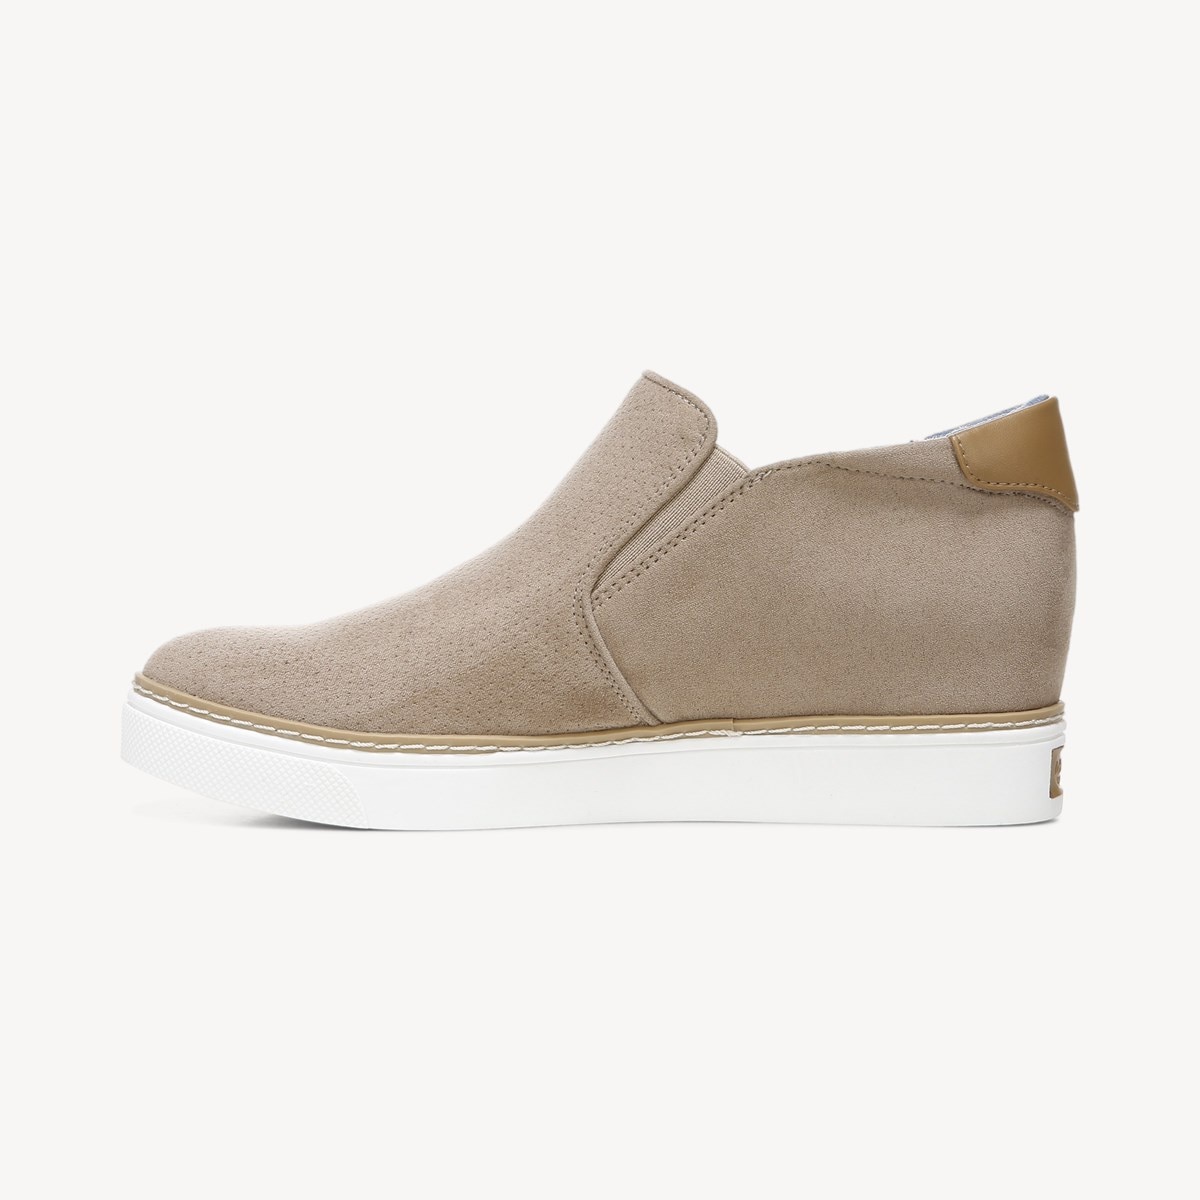 If Only Wedge Sneaker Bootie in Toasted Taupe Microfiber Perf ...